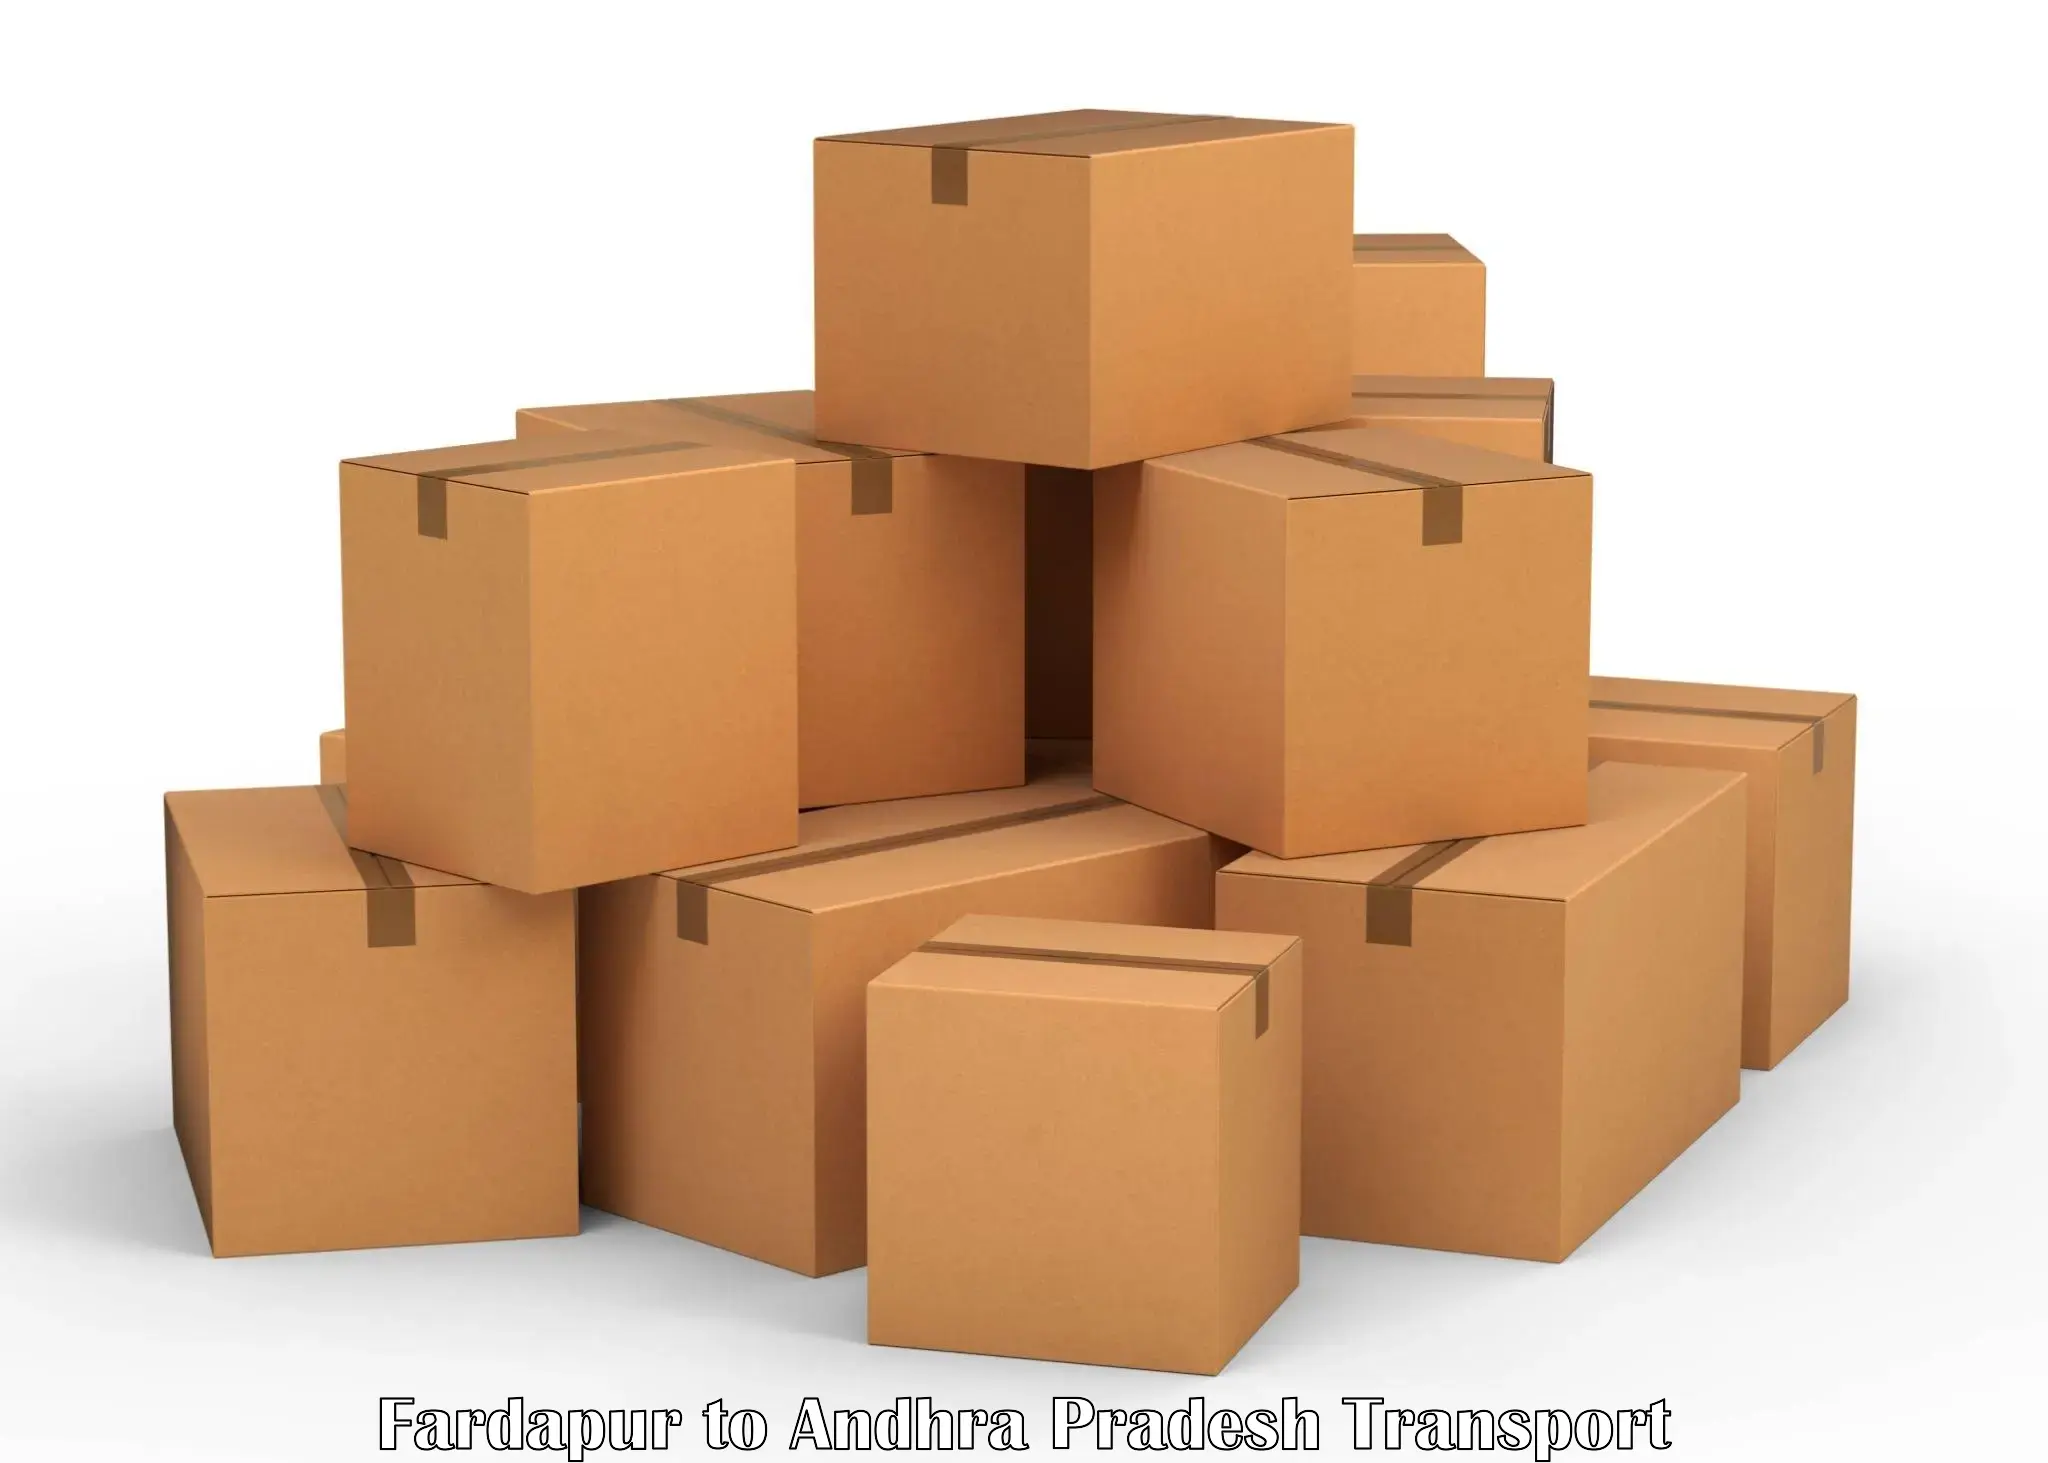 Furniture transport service in Fardapur to Ongole